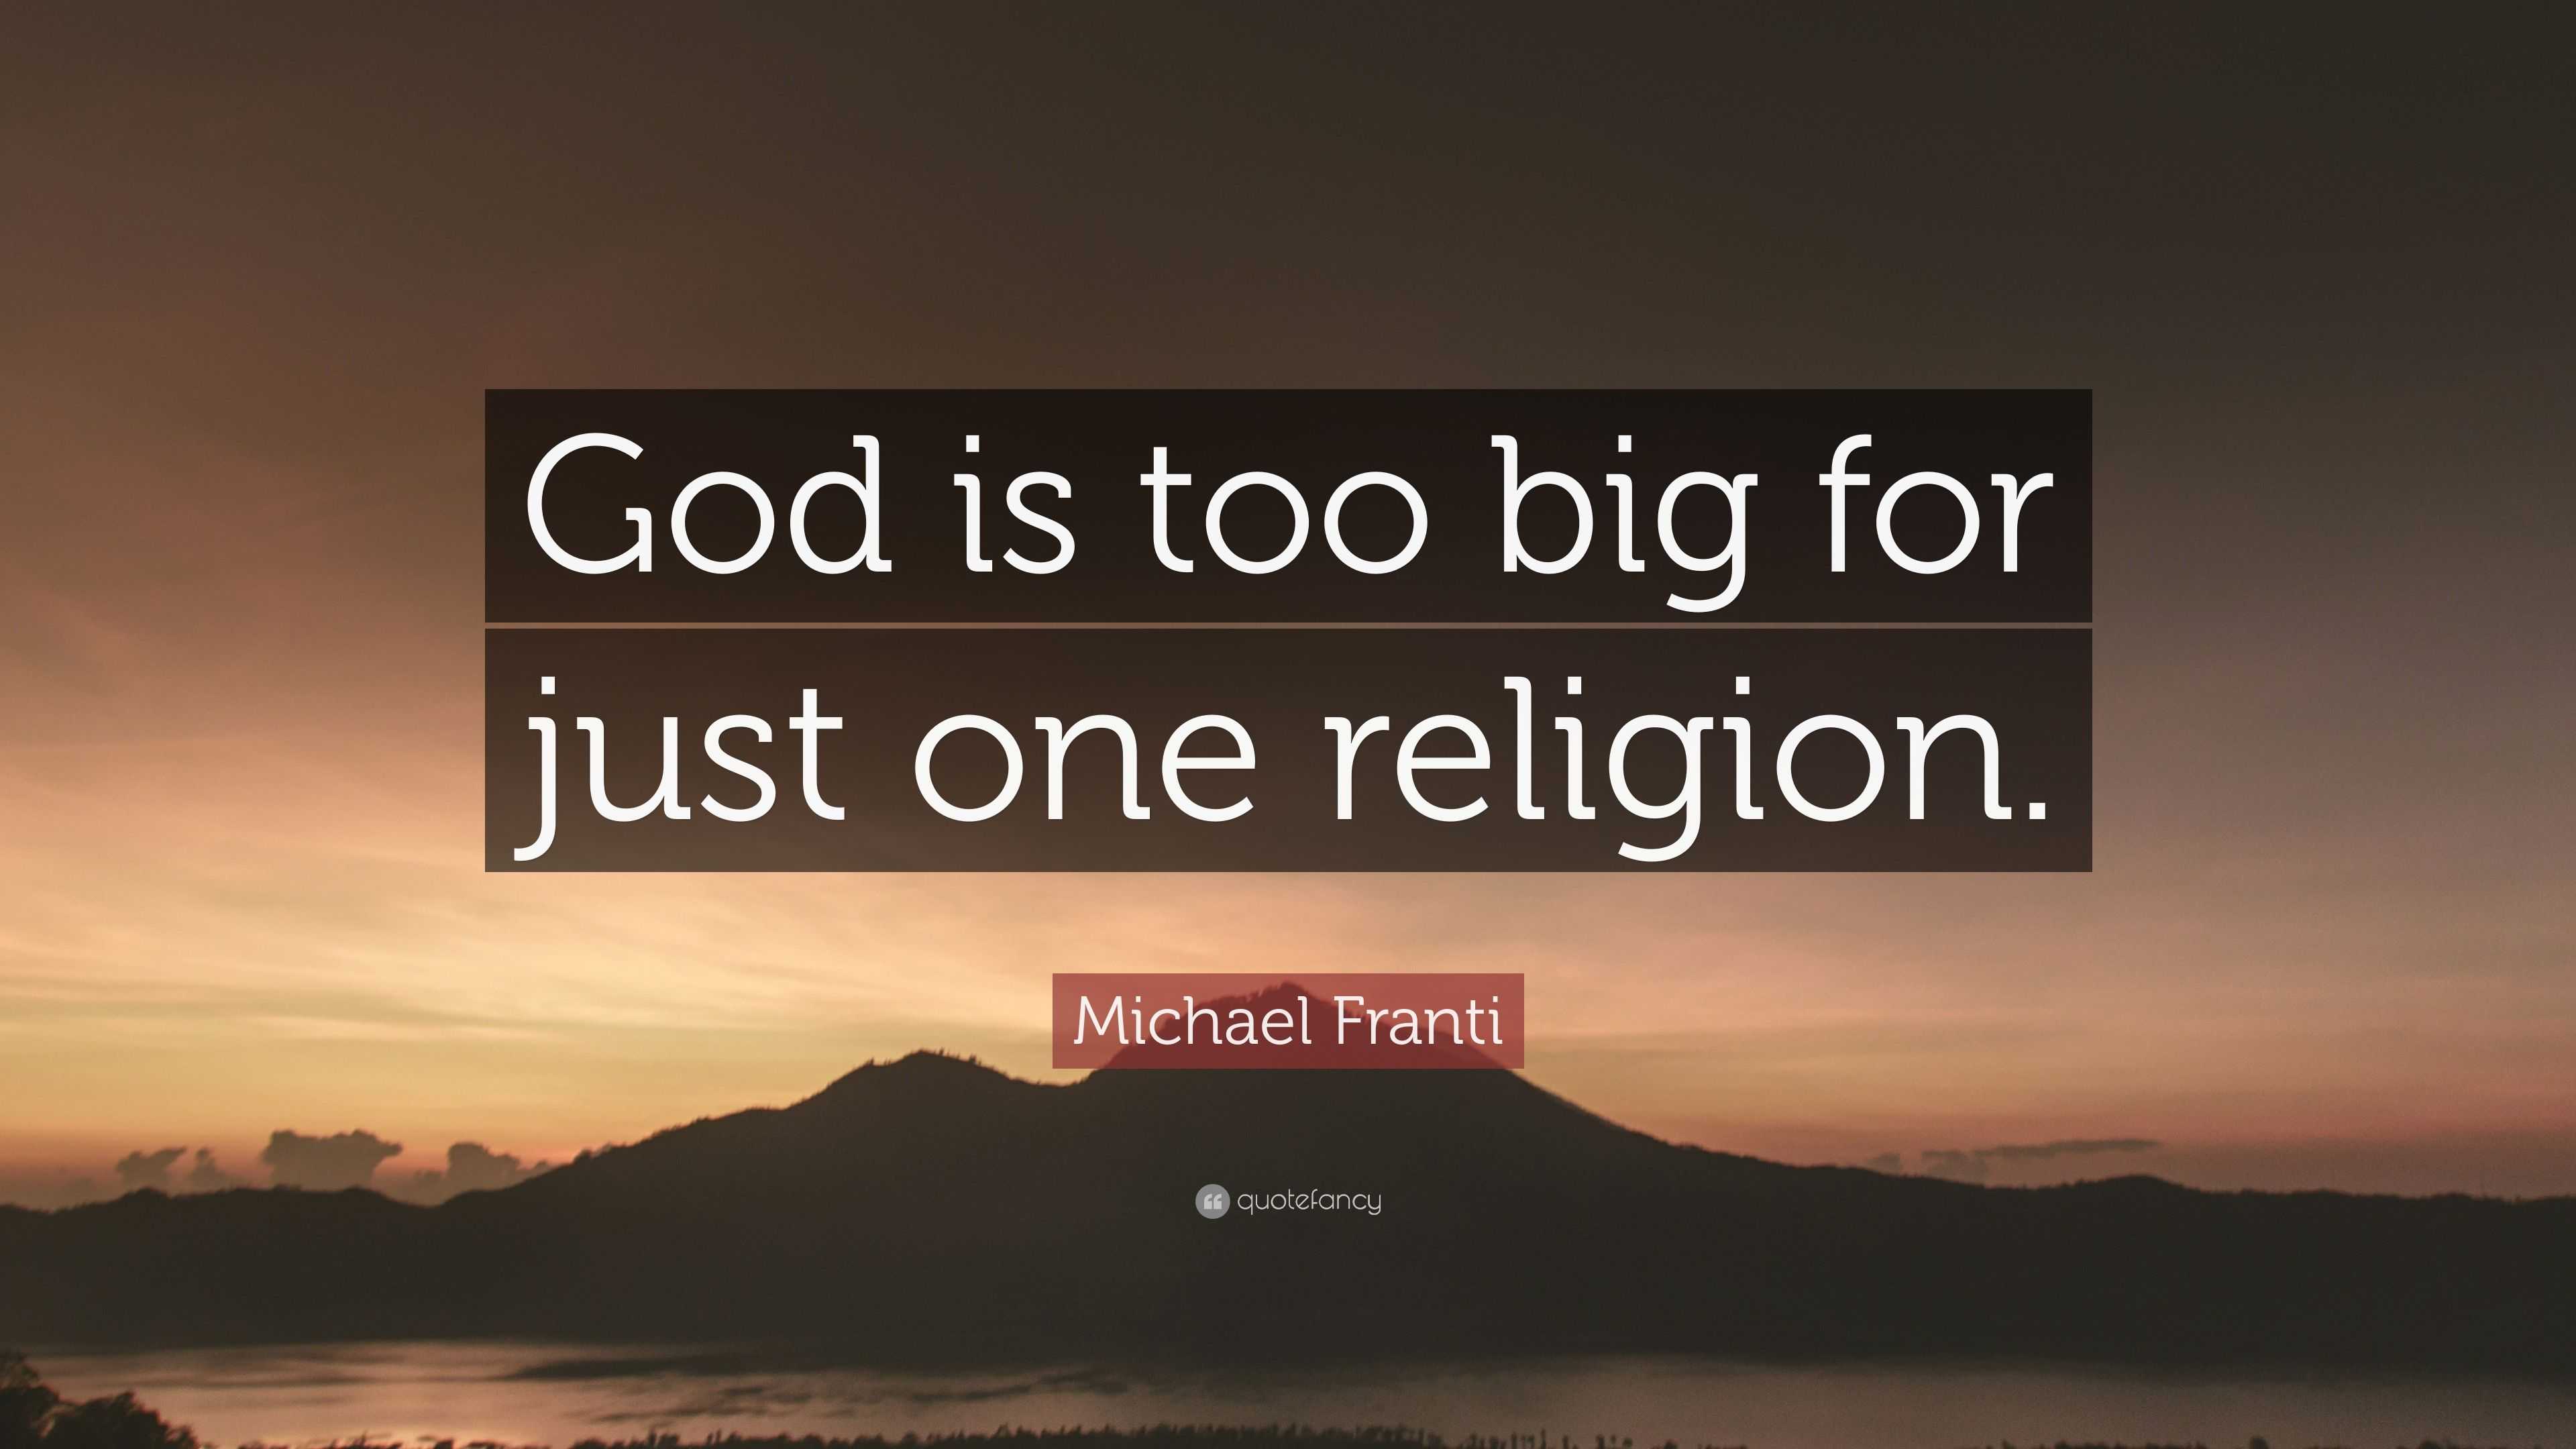 Foolish Sayings of the 'Wise': 'God is Too Big to Fit In One Religion' -  The Stream